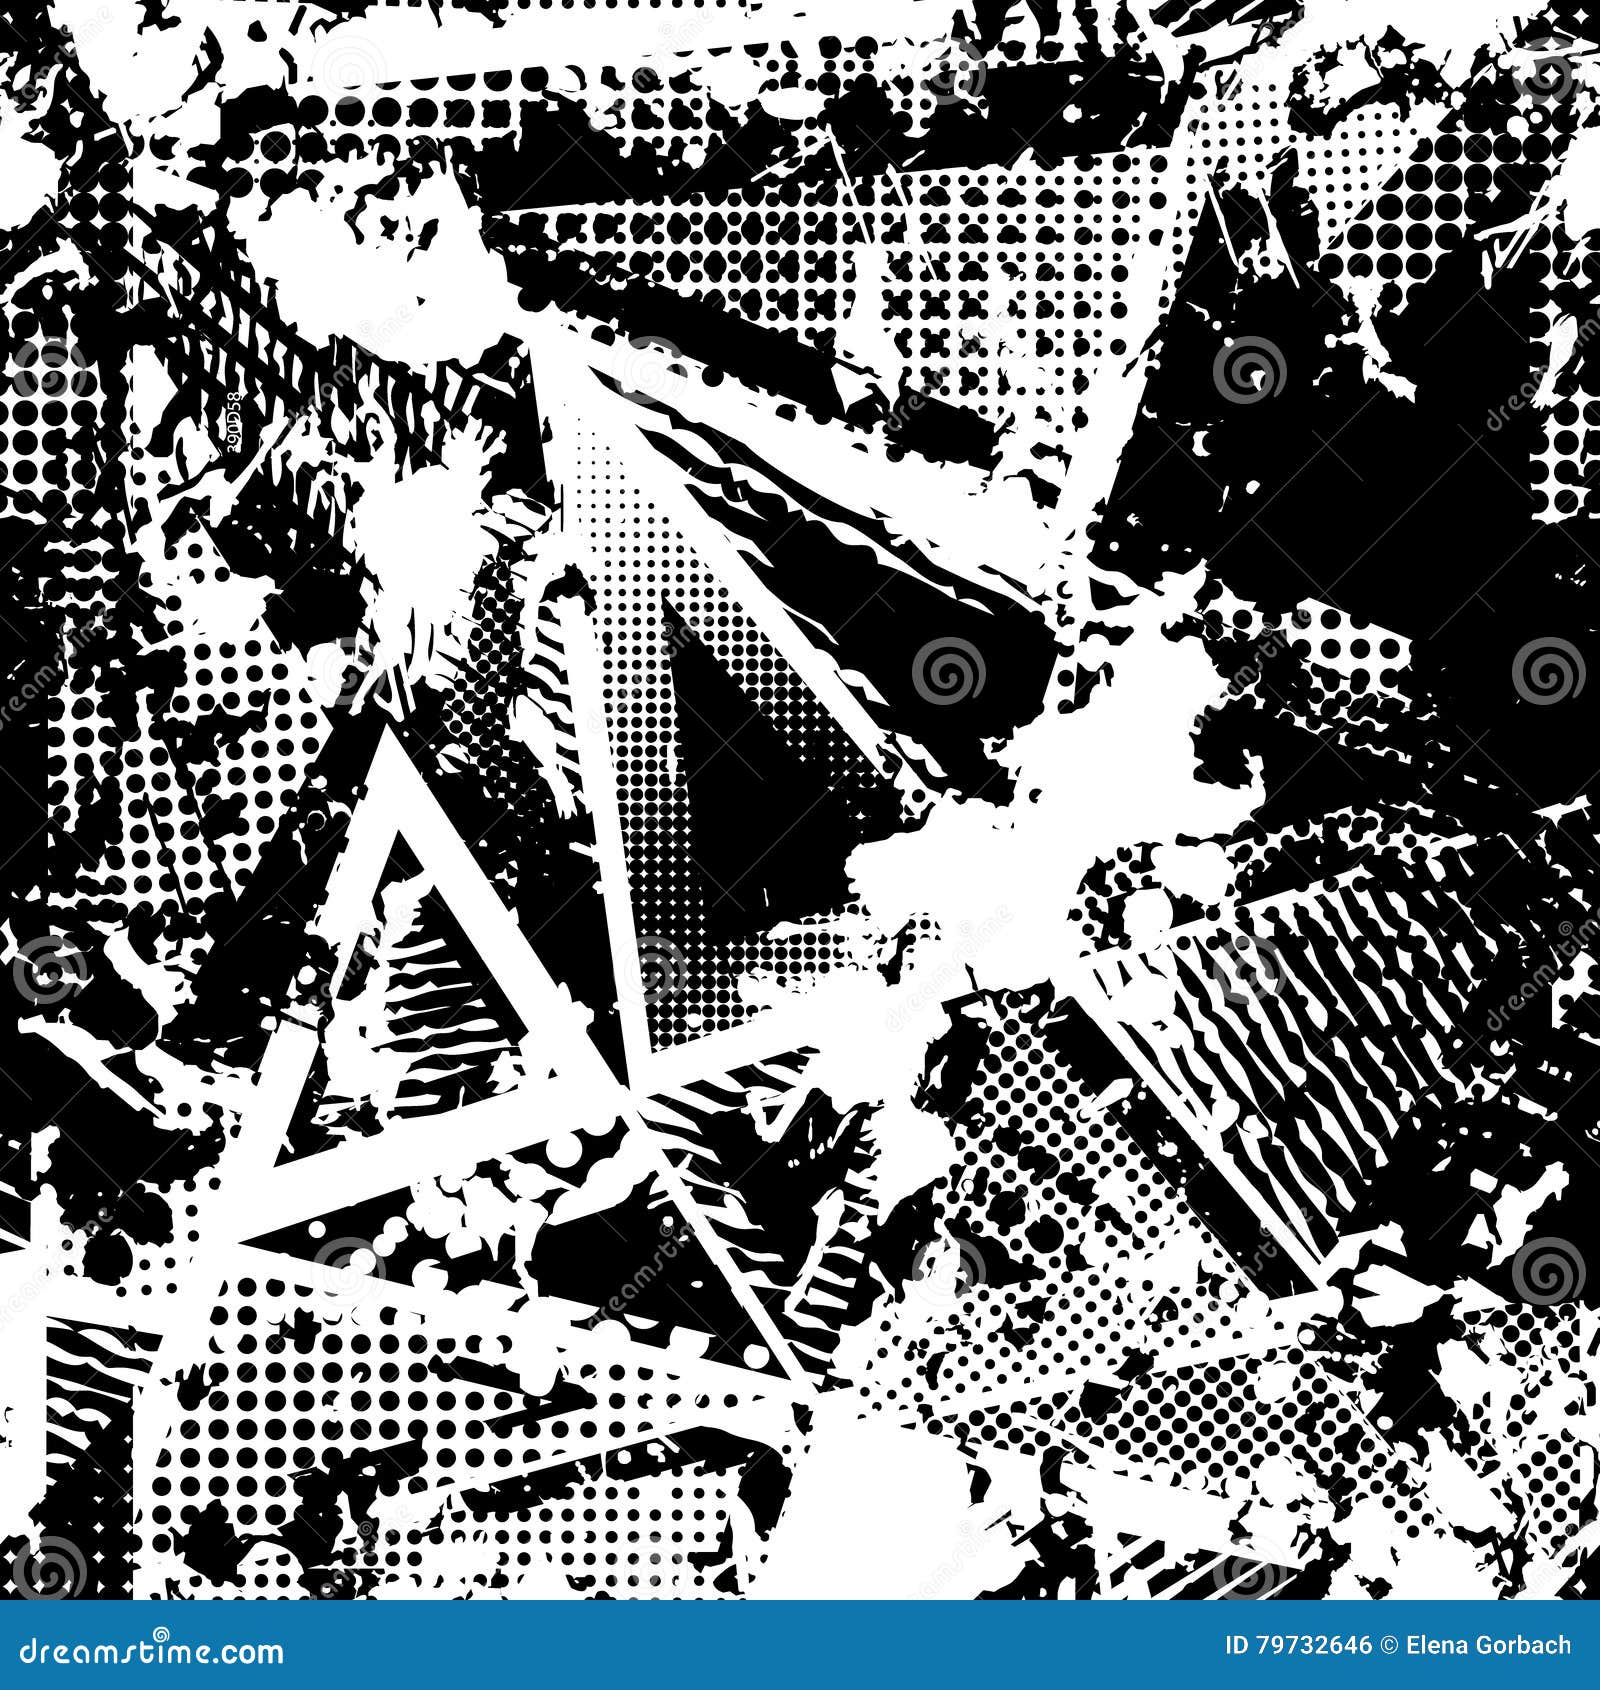 abstract urban seamless pattern. grunge texture background. scuffed drop sprays, triangles, dots, black and white spray